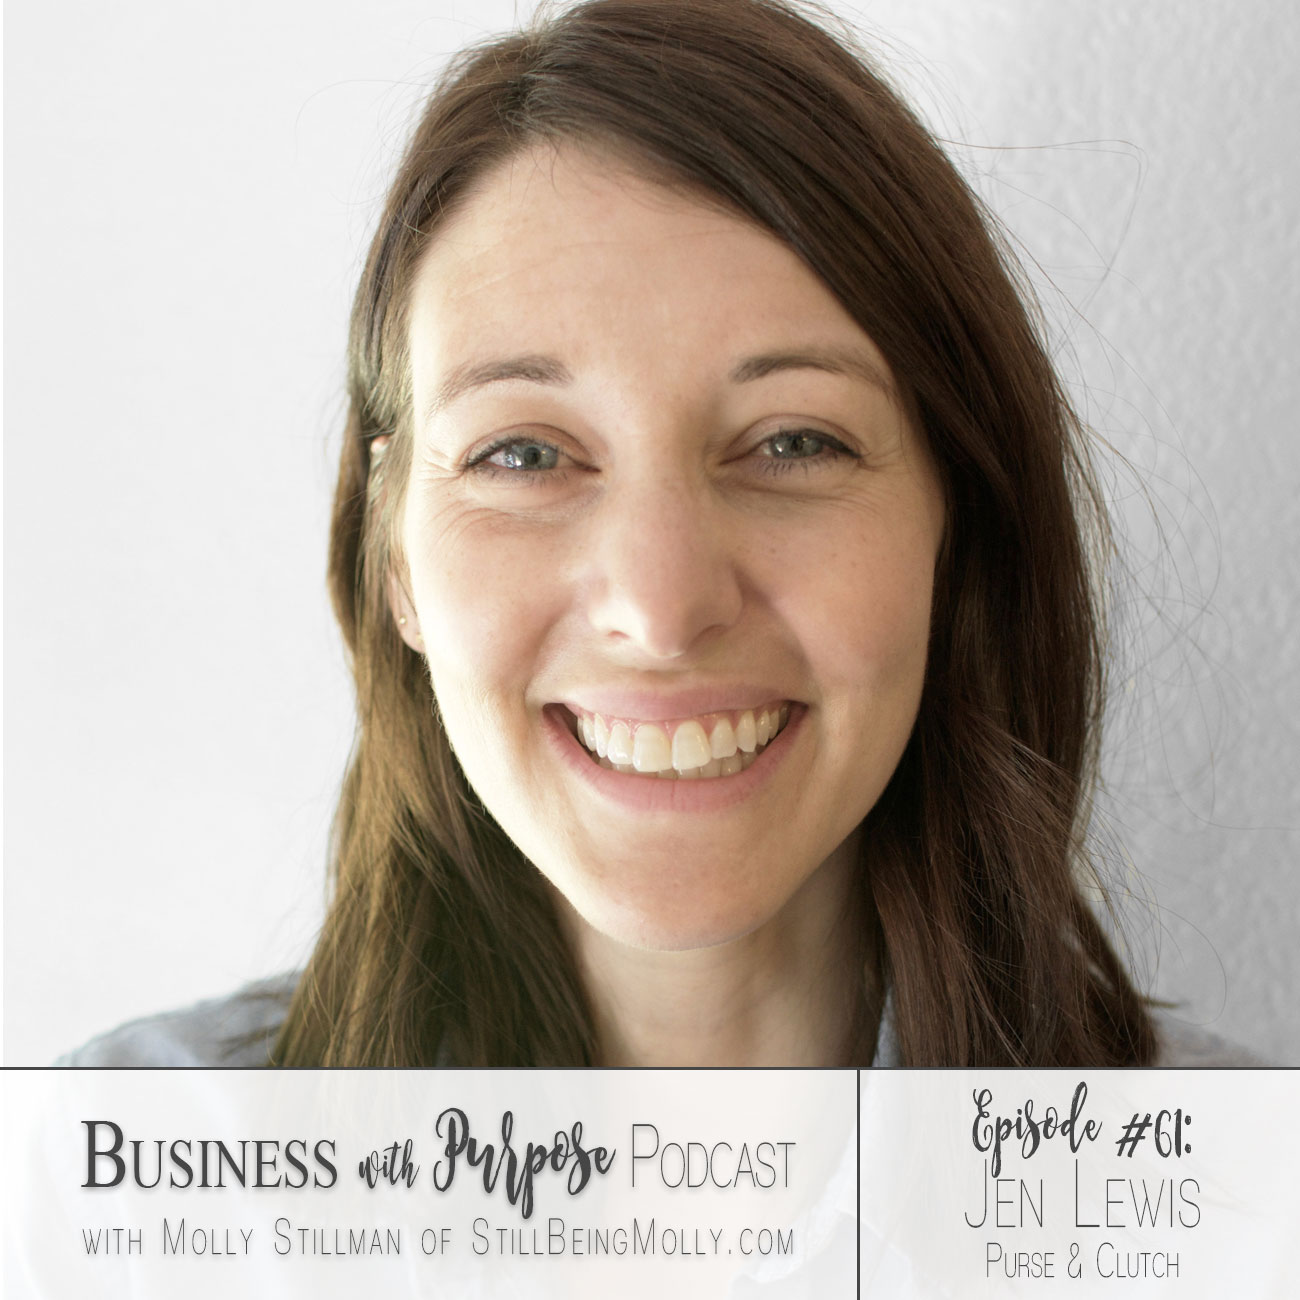 Business with Purpose Podcast EP 61: Jen Lewis, Founder of Purse and Clutch by North Carolina ethical blogger Still Being Molly